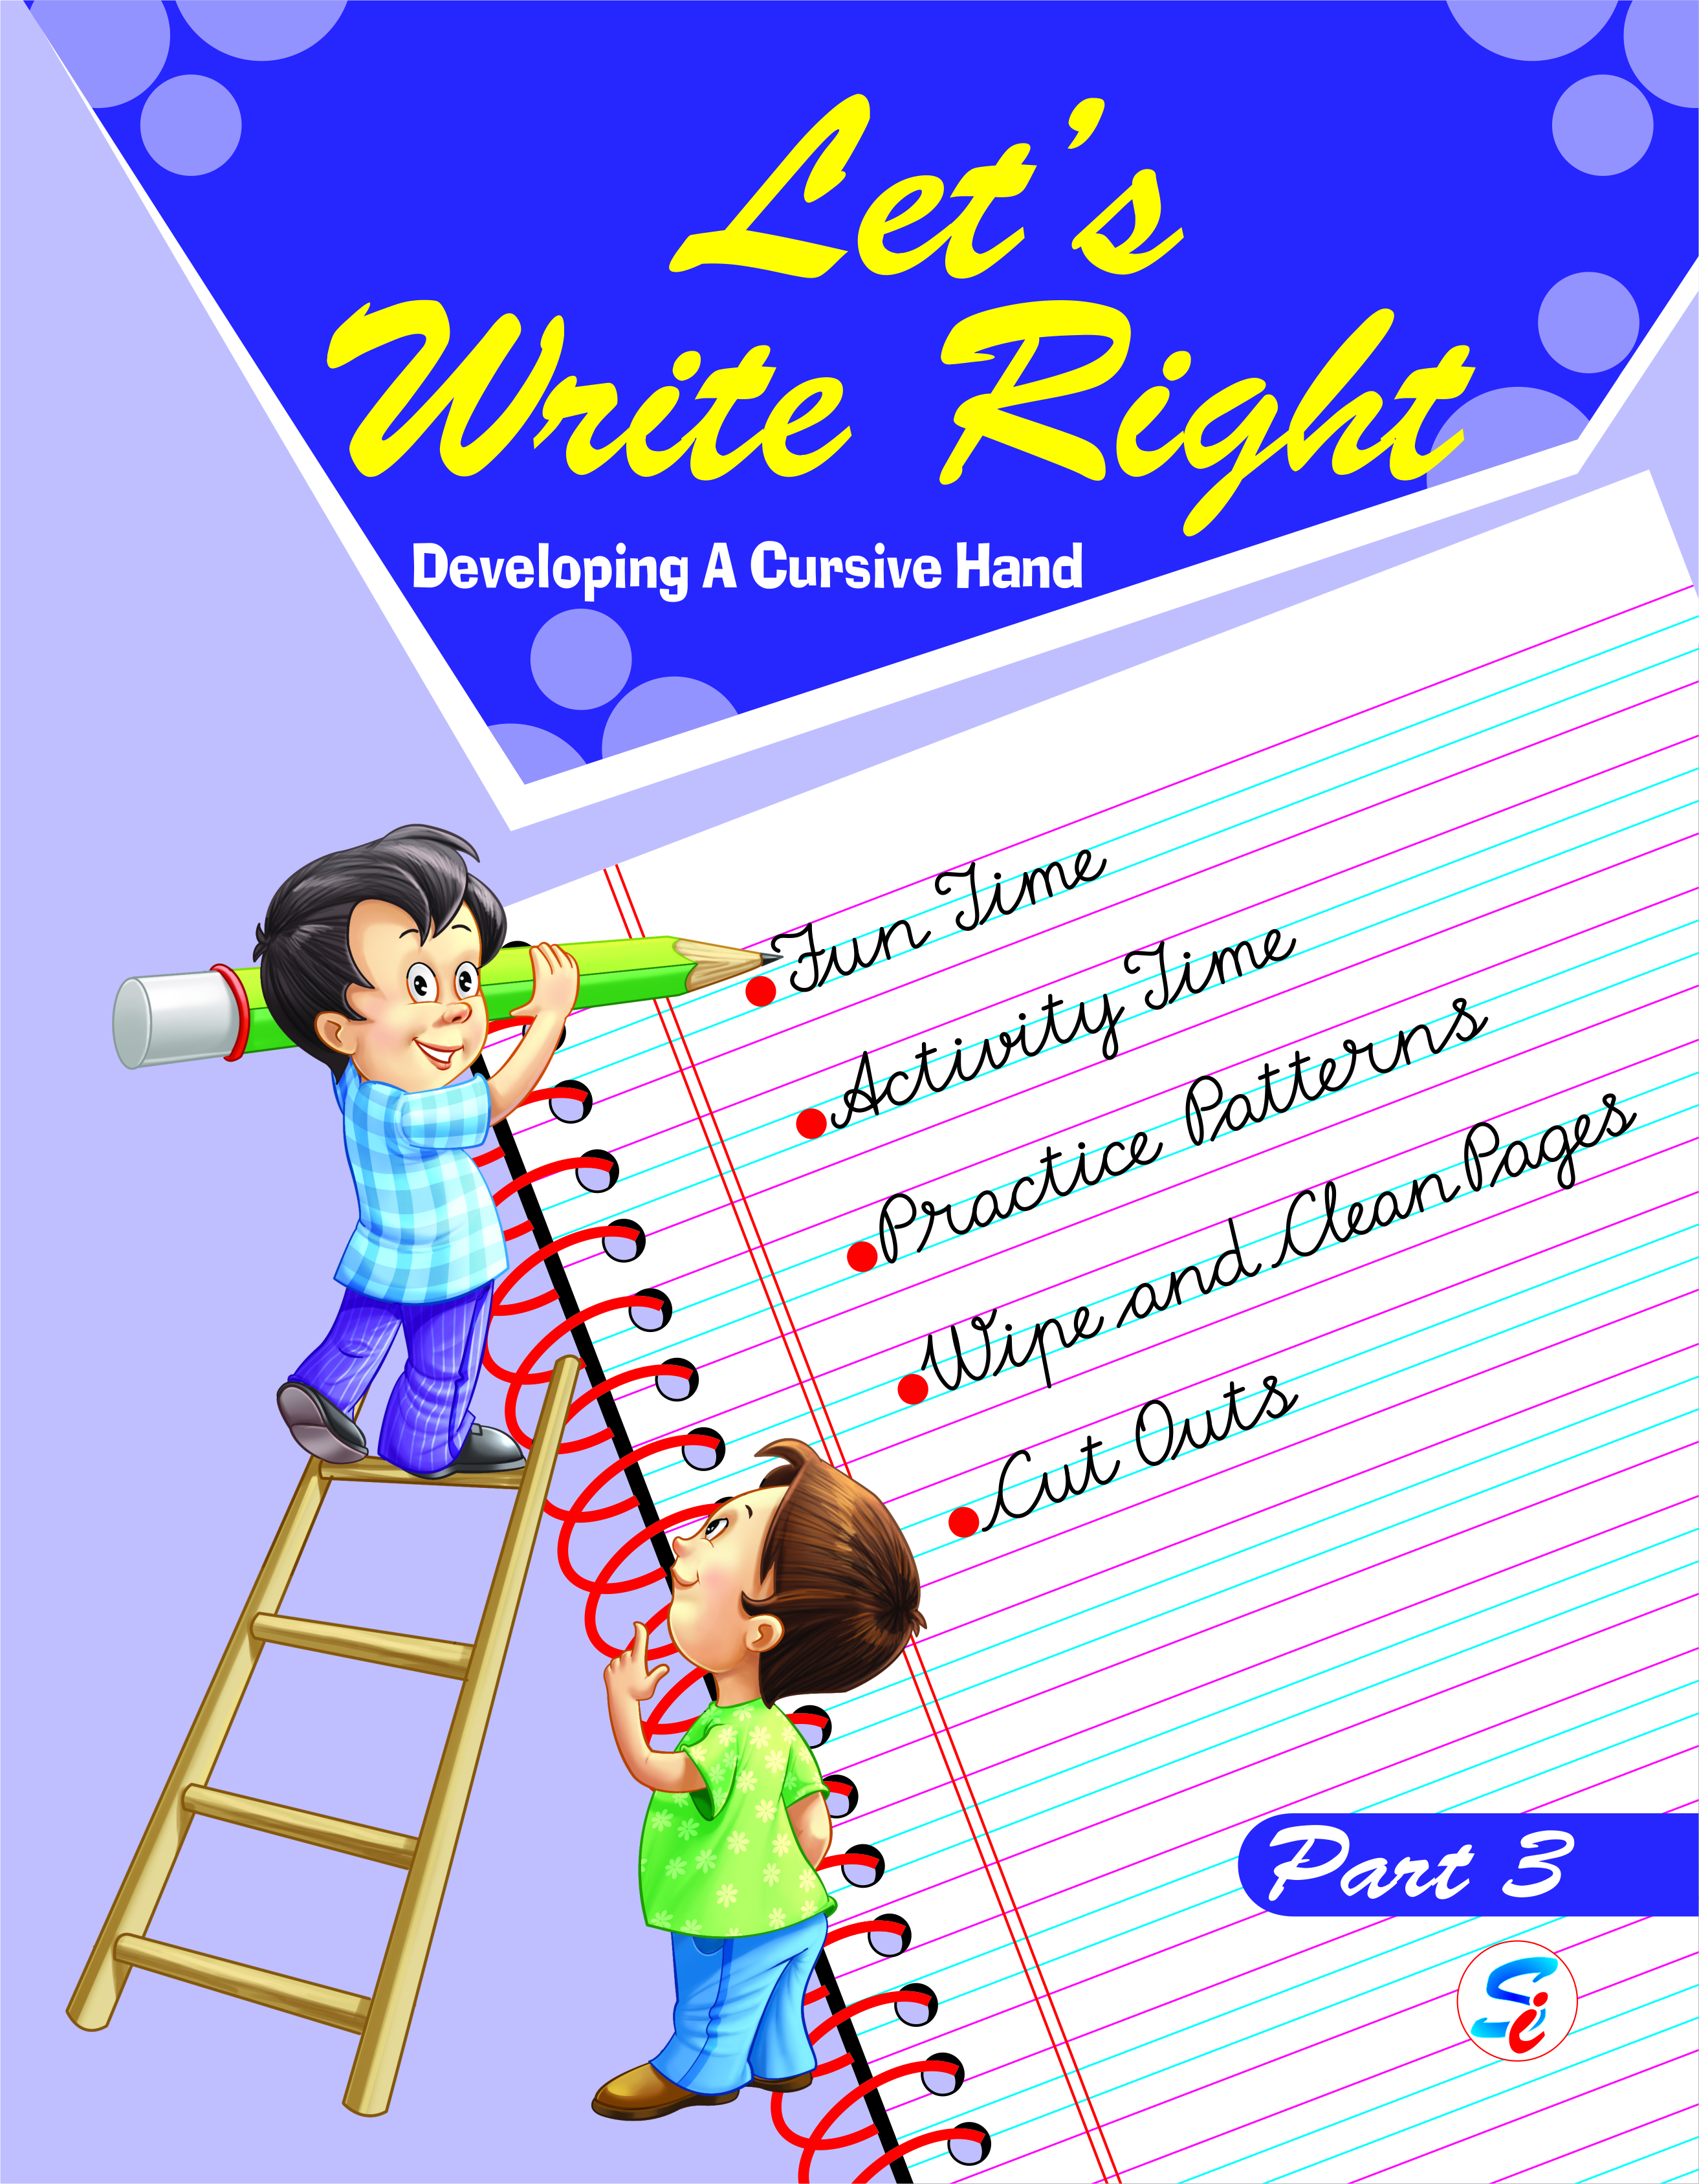 LET'S WRITE RIGHT PART 3